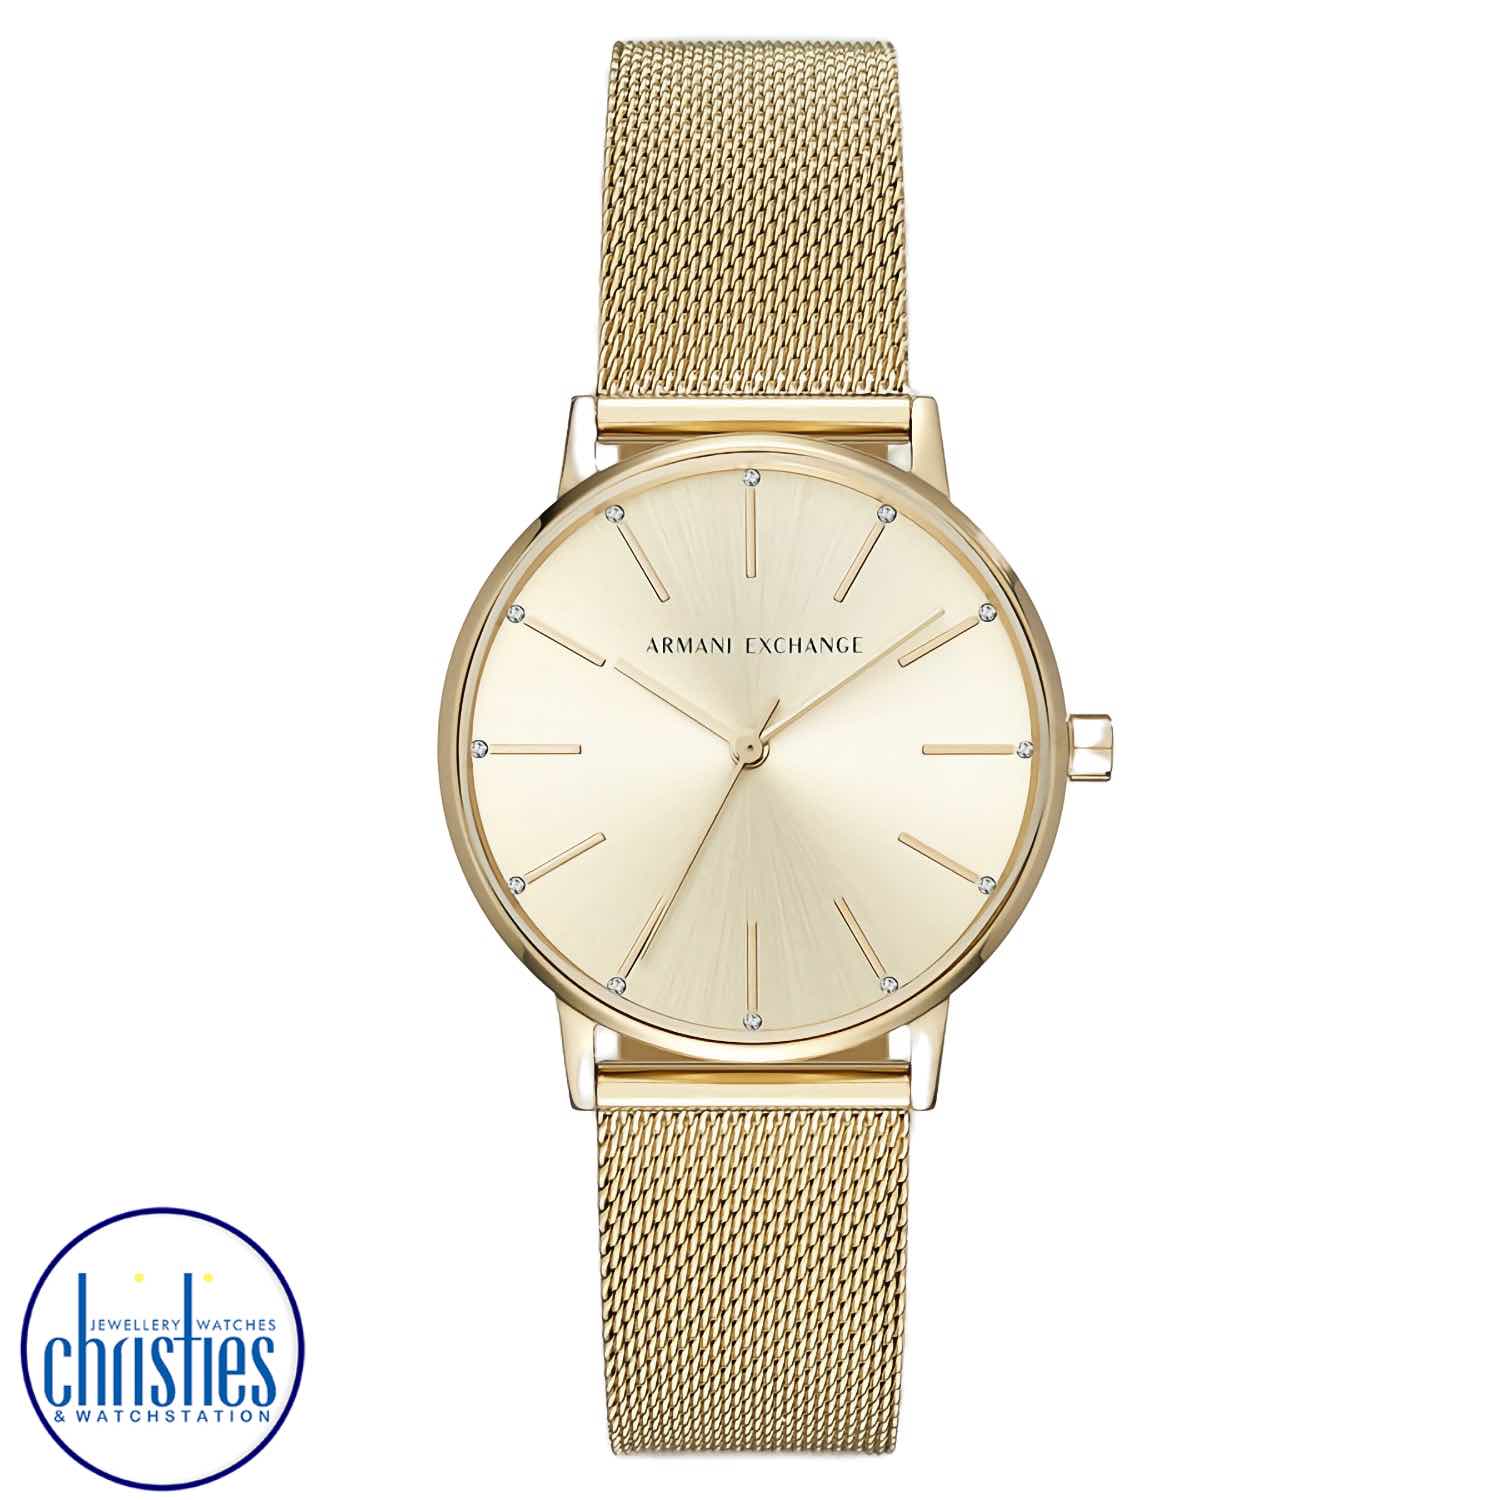 AX5536 A|X Armani Exchange Gold-Tone Stainless Steel Mesh Watch. AX5536 A|X Armani Exchange Gold-Tone Stainless Steel Mesh WatchAfterpay - Split your purchase into 4 instalments - Pay for your purchase over 4 instalments, due every two weeks.